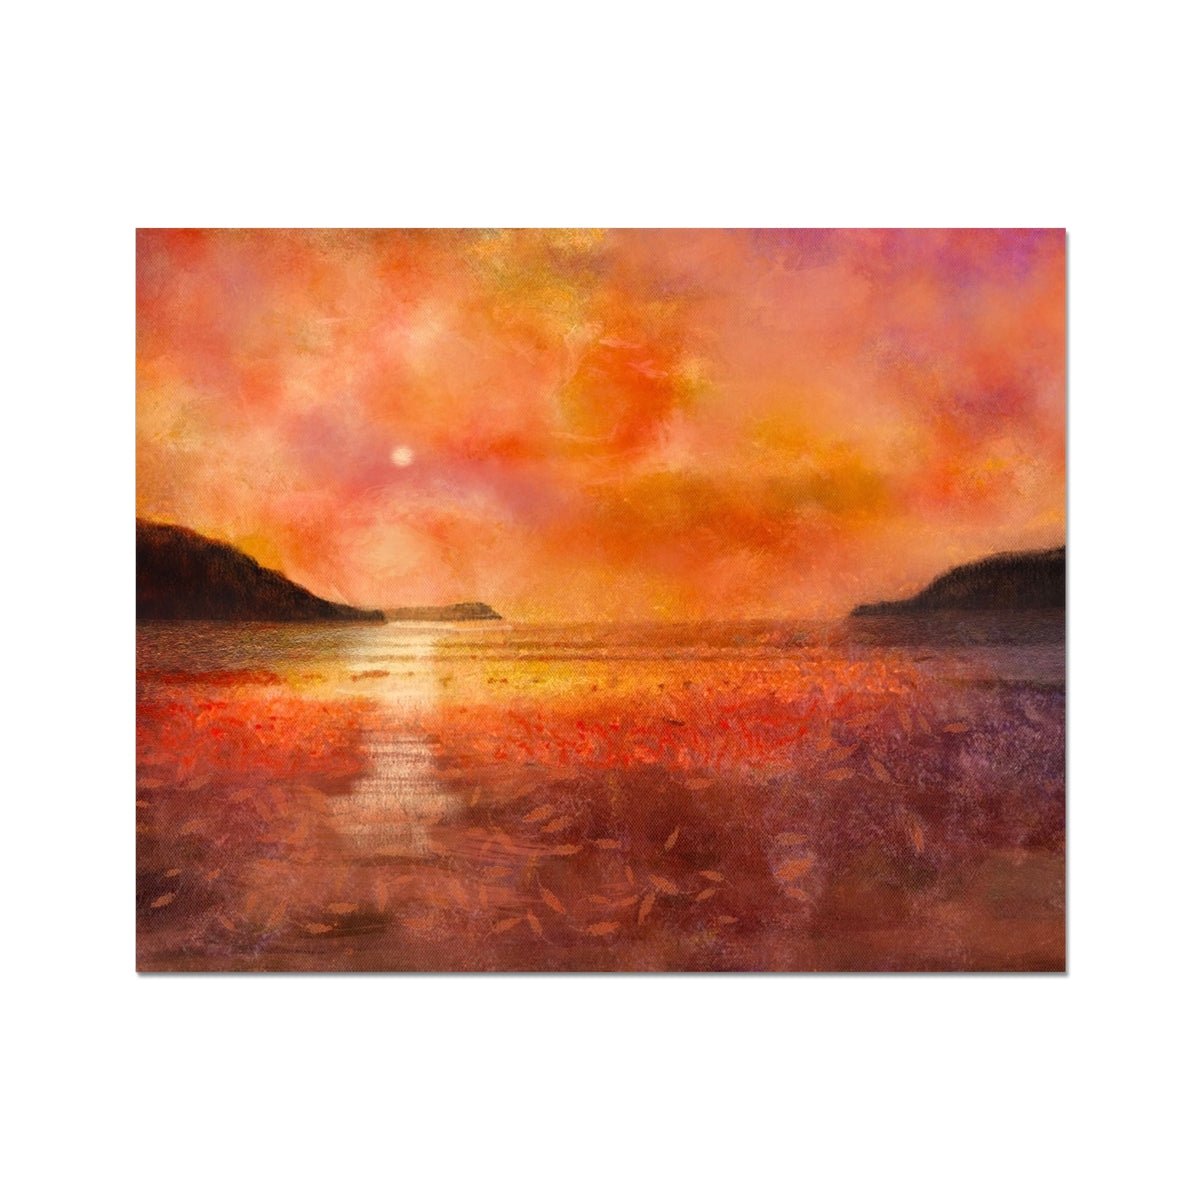 Calgary Beach Sunset Mull Painting | Artist Proof Collector Prints From Scotland-Artist Proof Collector Prints-Hebridean Islands Art Gallery-20"x16"-Paintings, Prints, Homeware, Art Gifts From Scotland By Scottish Artist Kevin Hunter